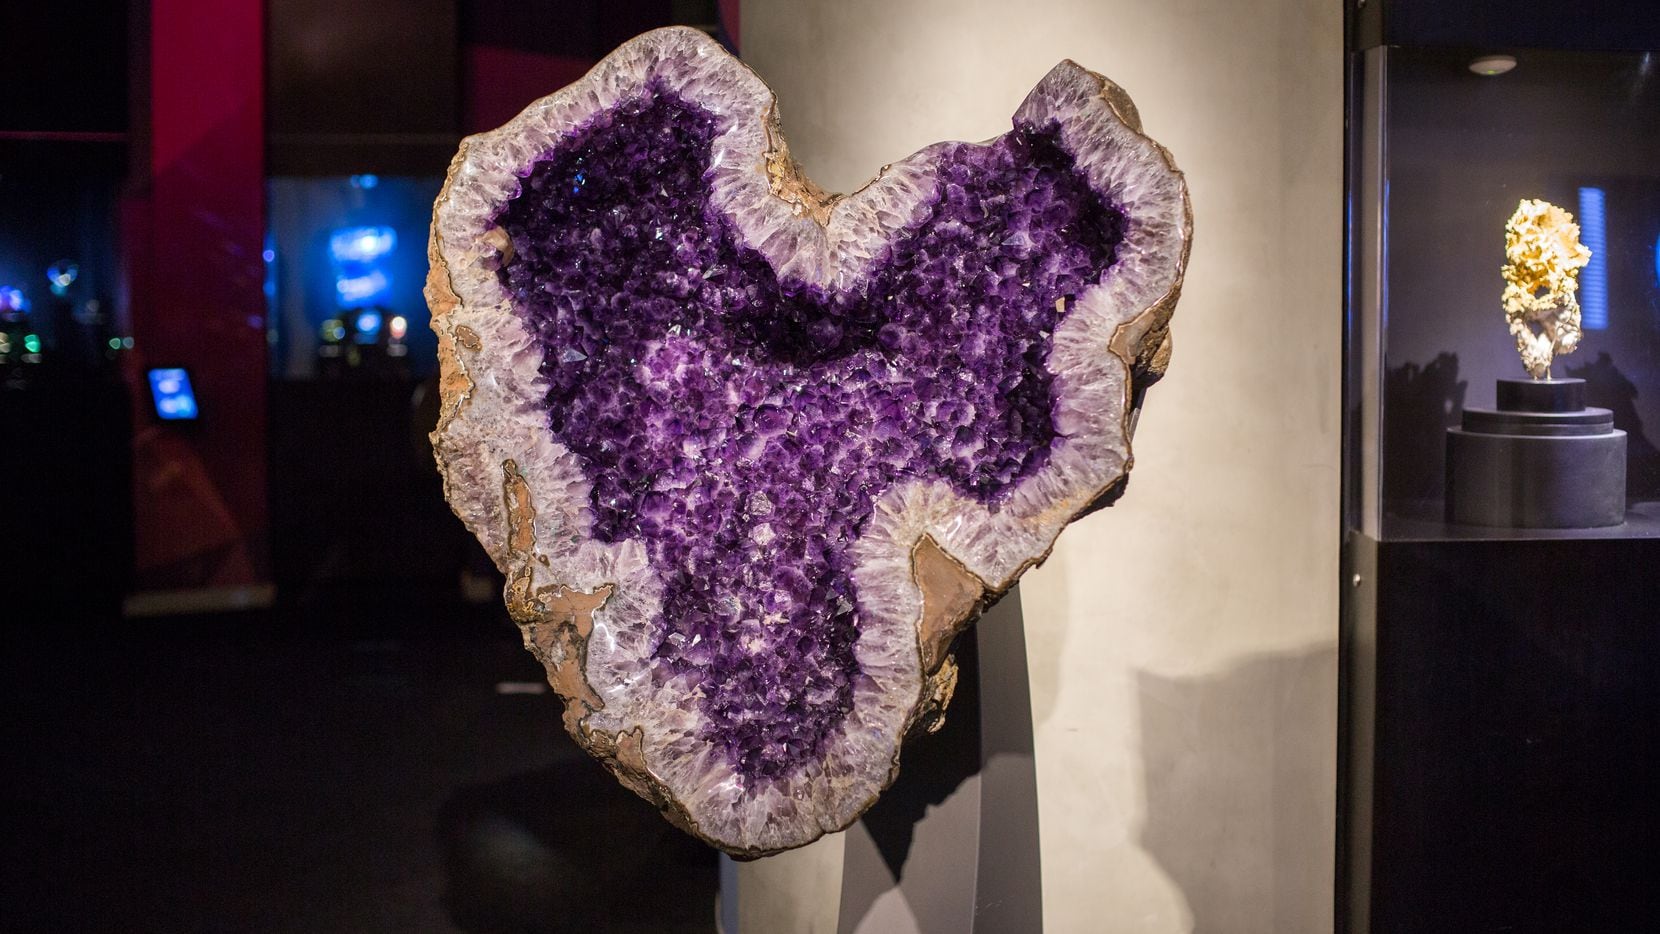 The Perot Museum of Nature and Science's Valentine's Day event, Romancing the Stone, will...